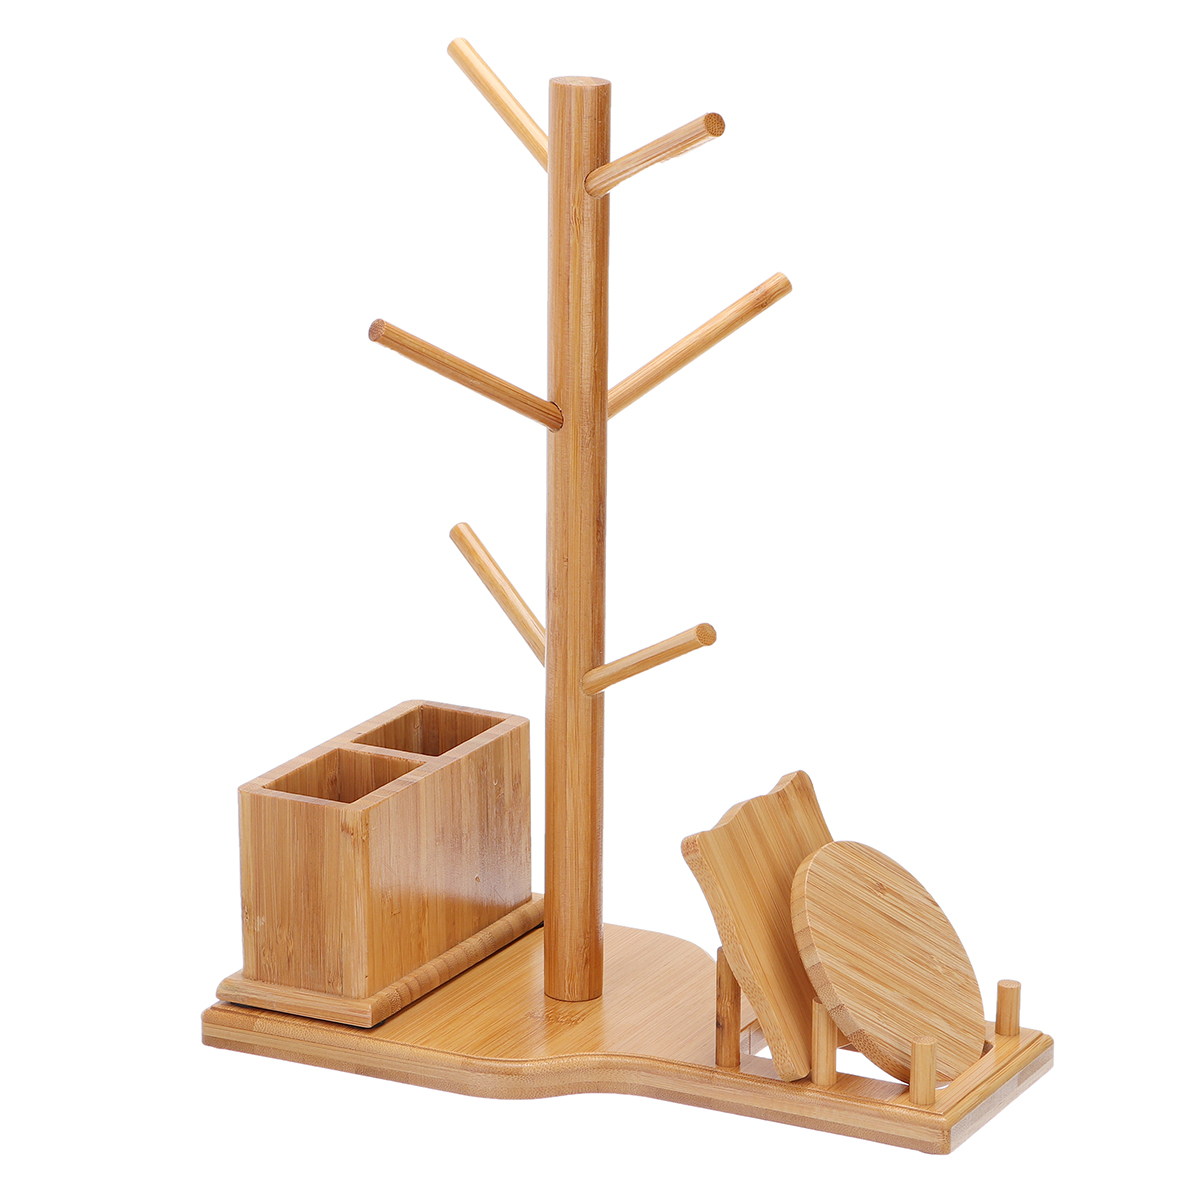 Bamboo-Cup-Mat-Water-Cup-Storage-Rack-Creative-Cup-Organizing-Shelf-Household-Office-Living-Wooden-G-1756070-2